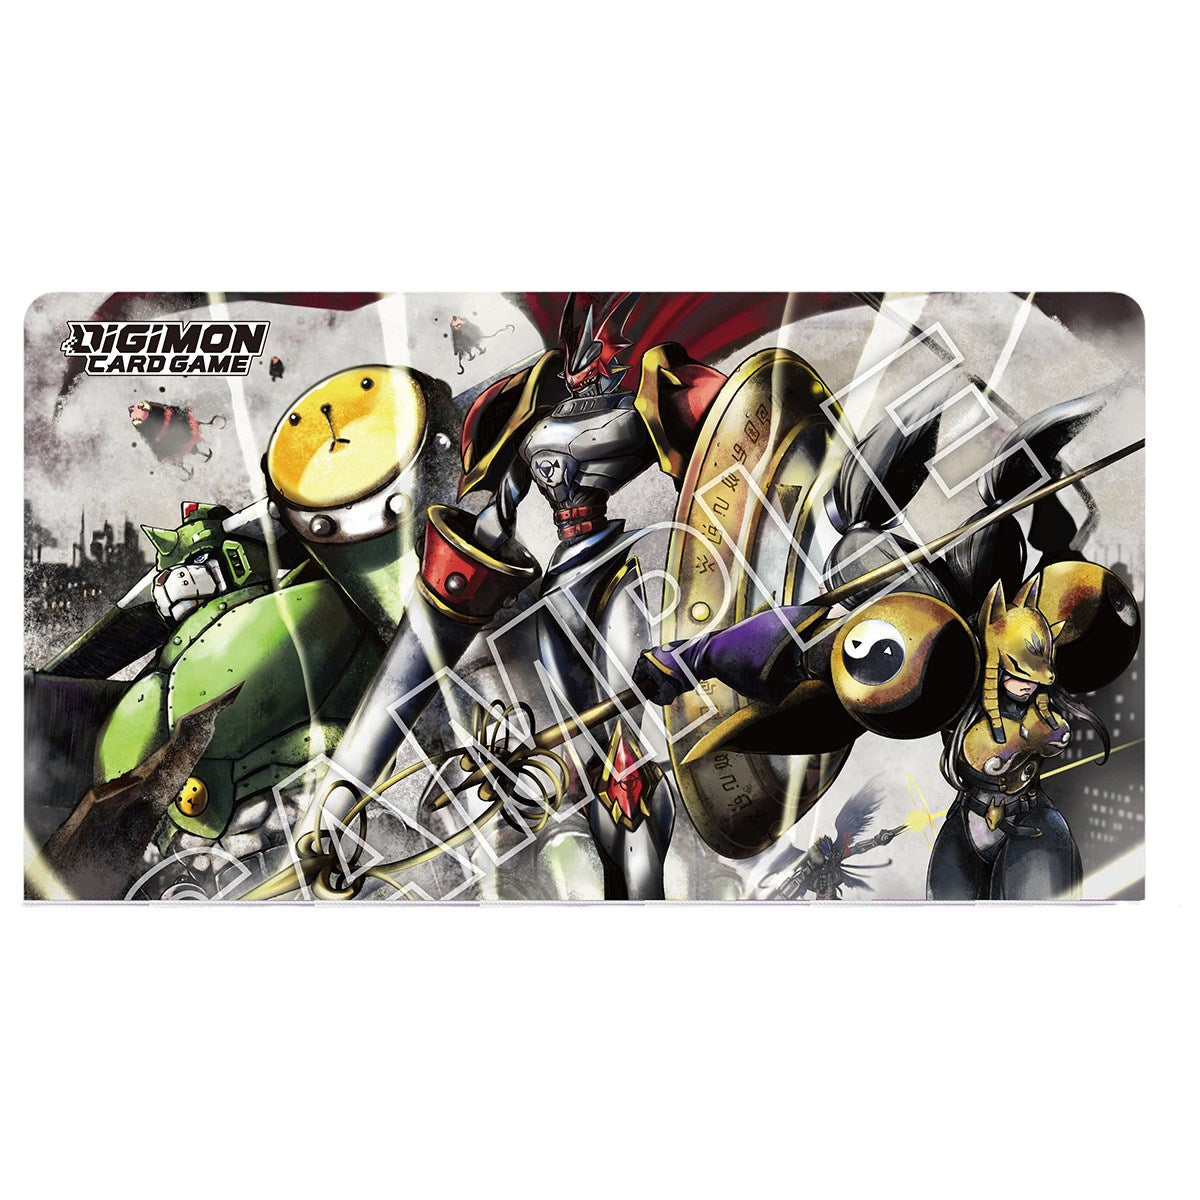 Digimon Card Game: Tamer's Card Set 1 Exclusive Playmat